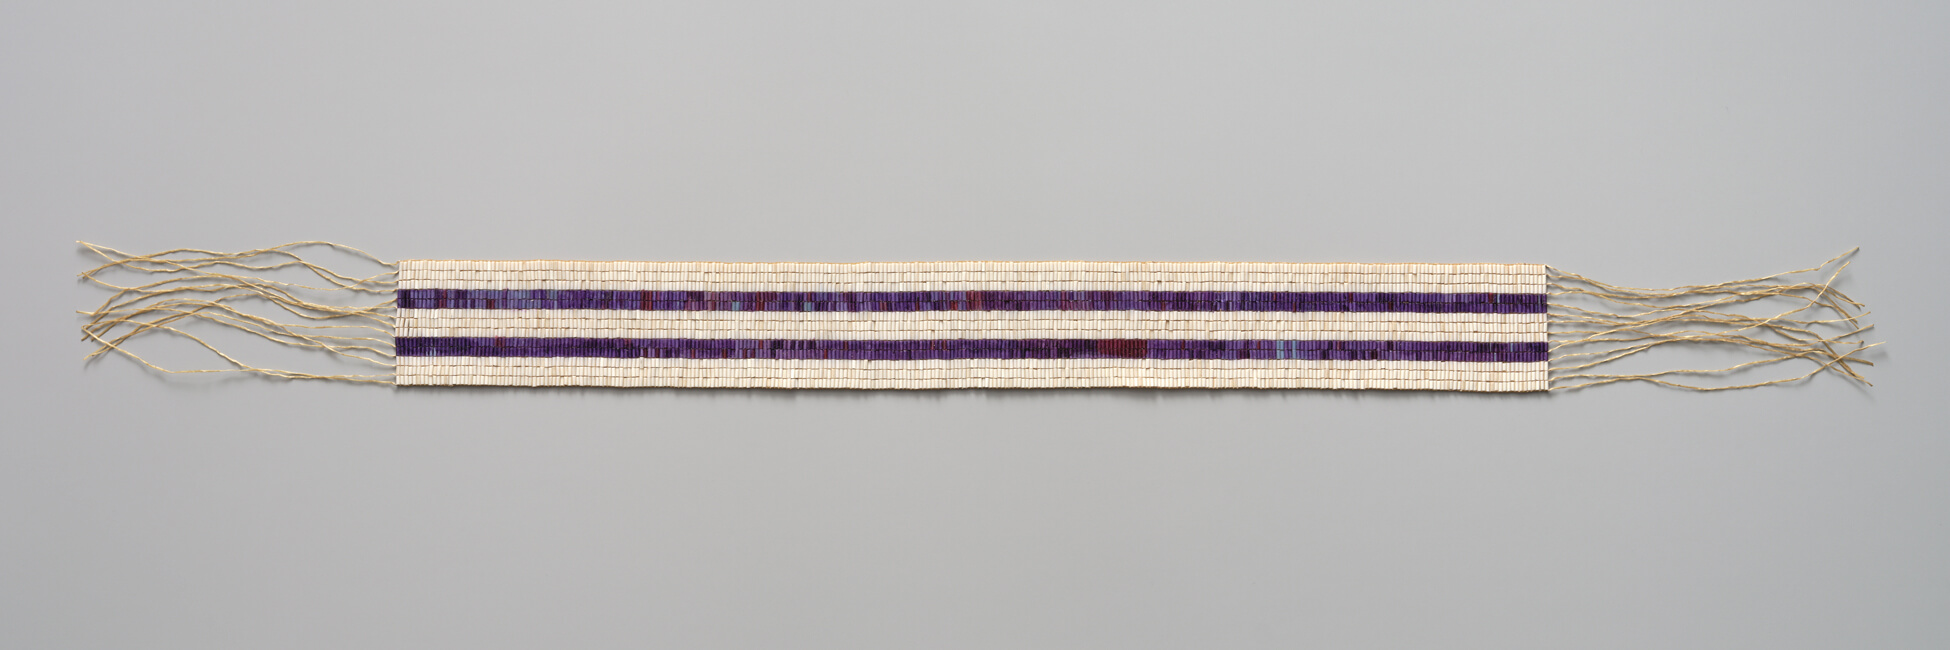 Two-Row wampum belt, reproduction by Jake Thomas